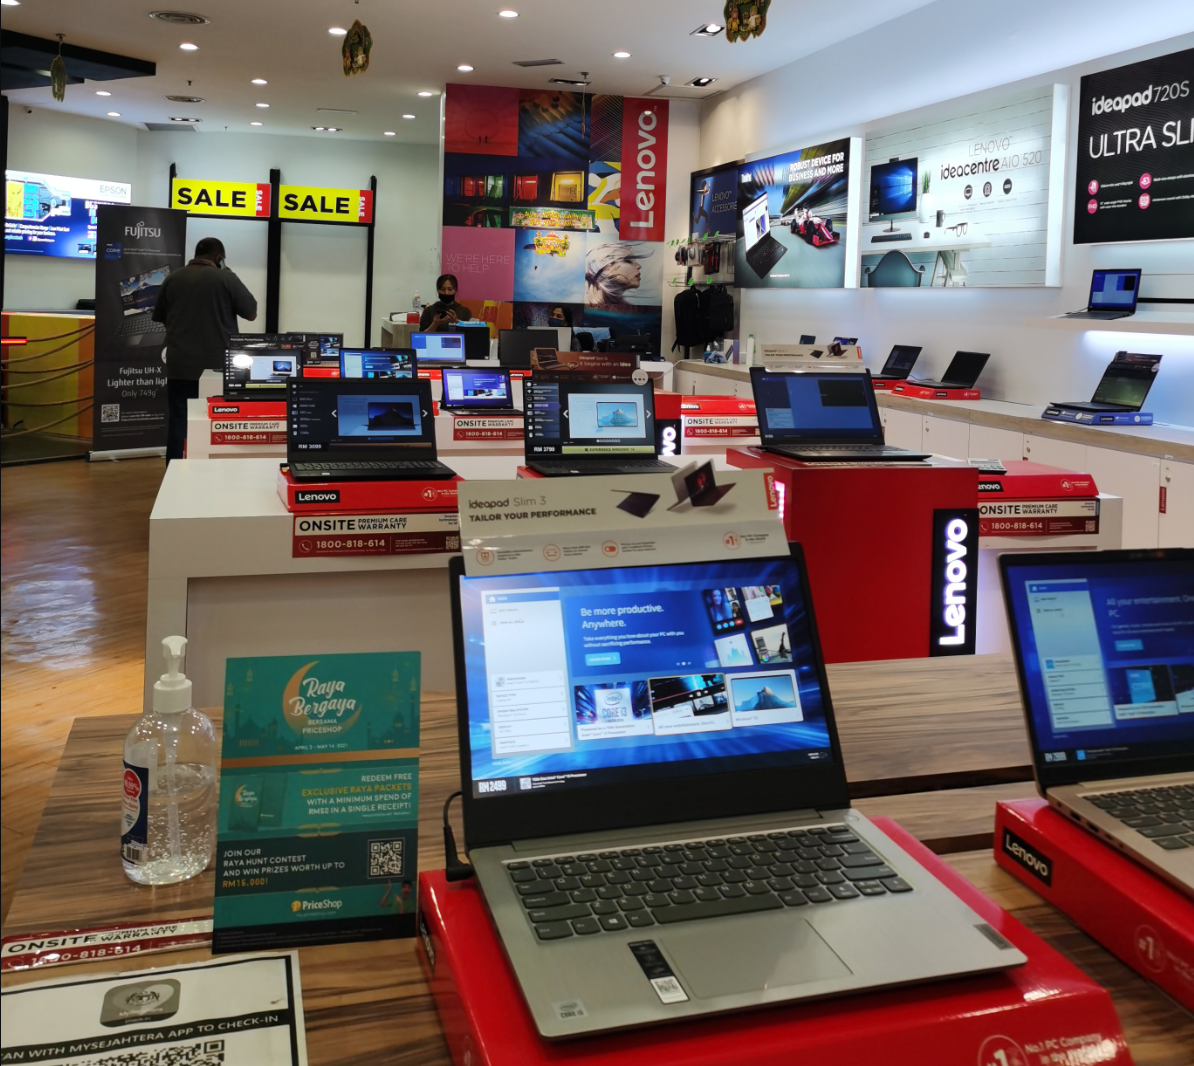 LENOVO Exclusive Store by NF IT Sdn Bhd